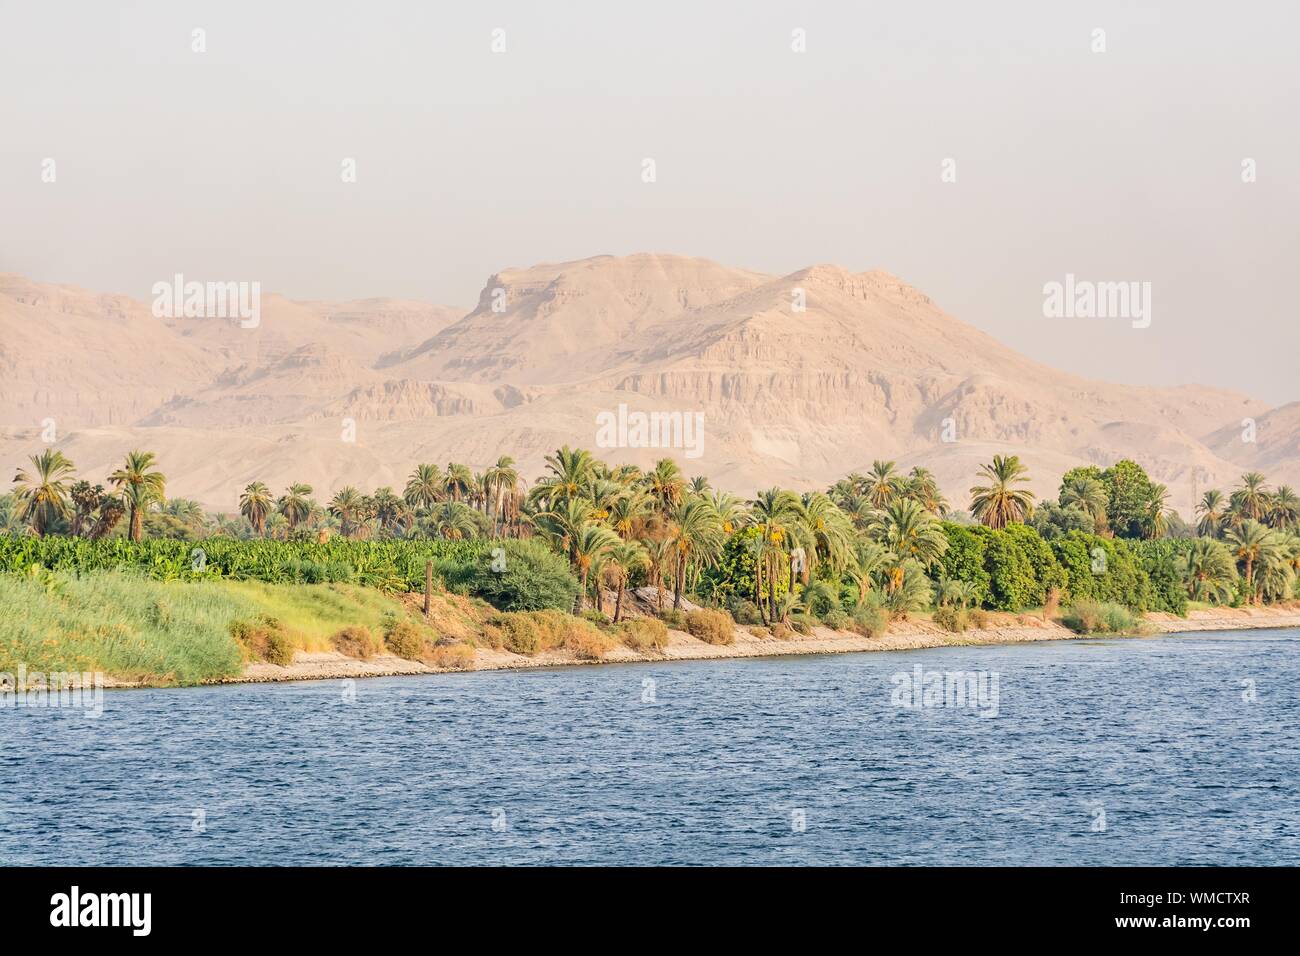 Bank of Nile river seen during touristic cruise, Egypt Stock Photo